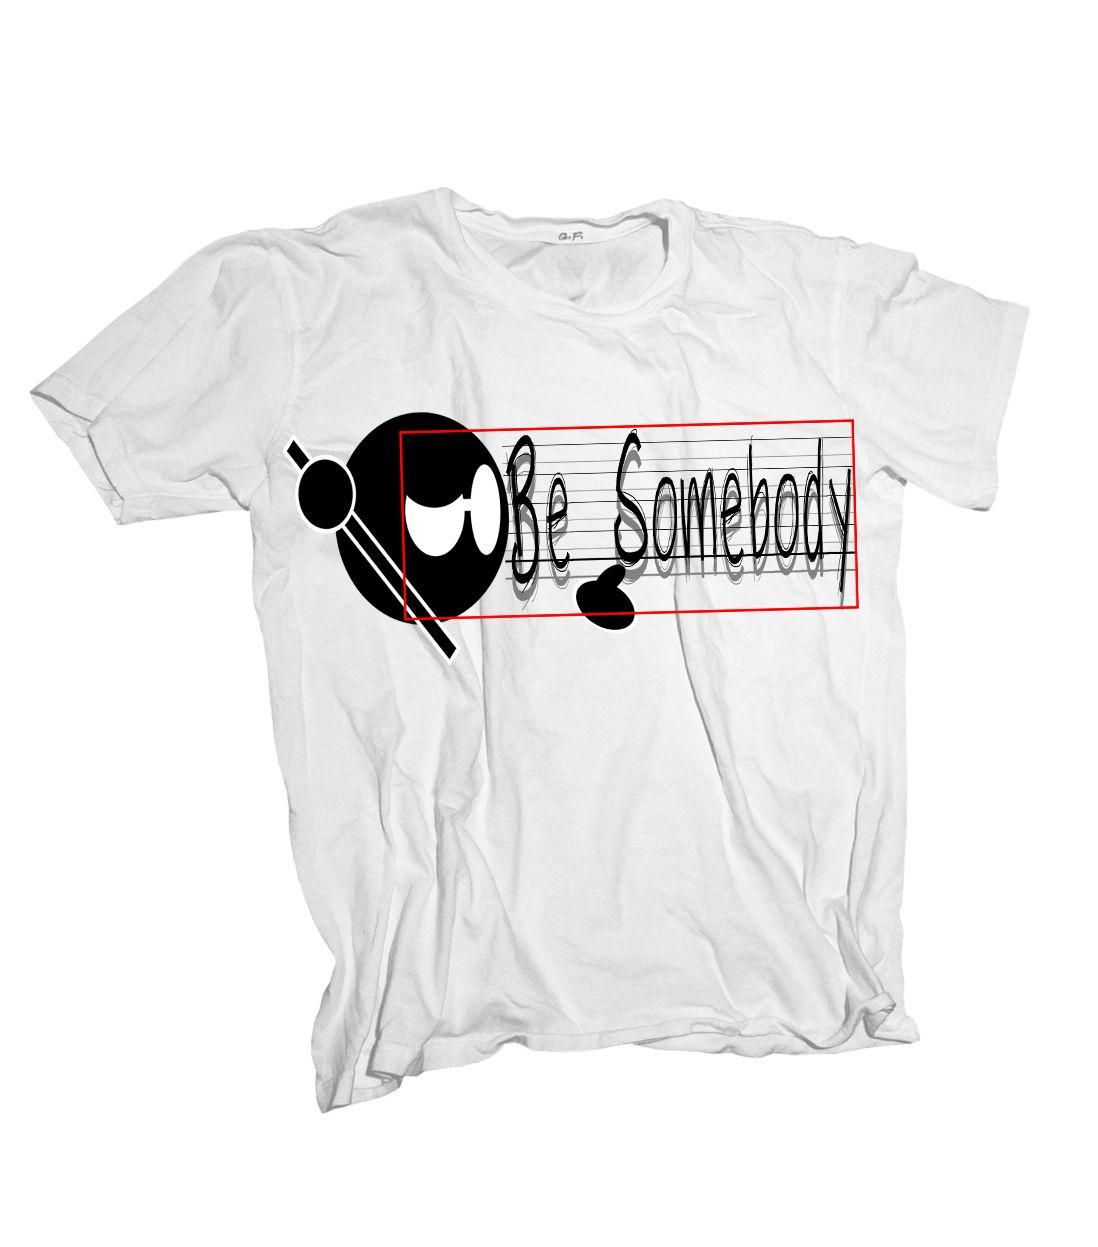 Cool T Logo - The Be Somebody Classic T-Shirt by Mahweh Clothing | Logo T-Shirts ...